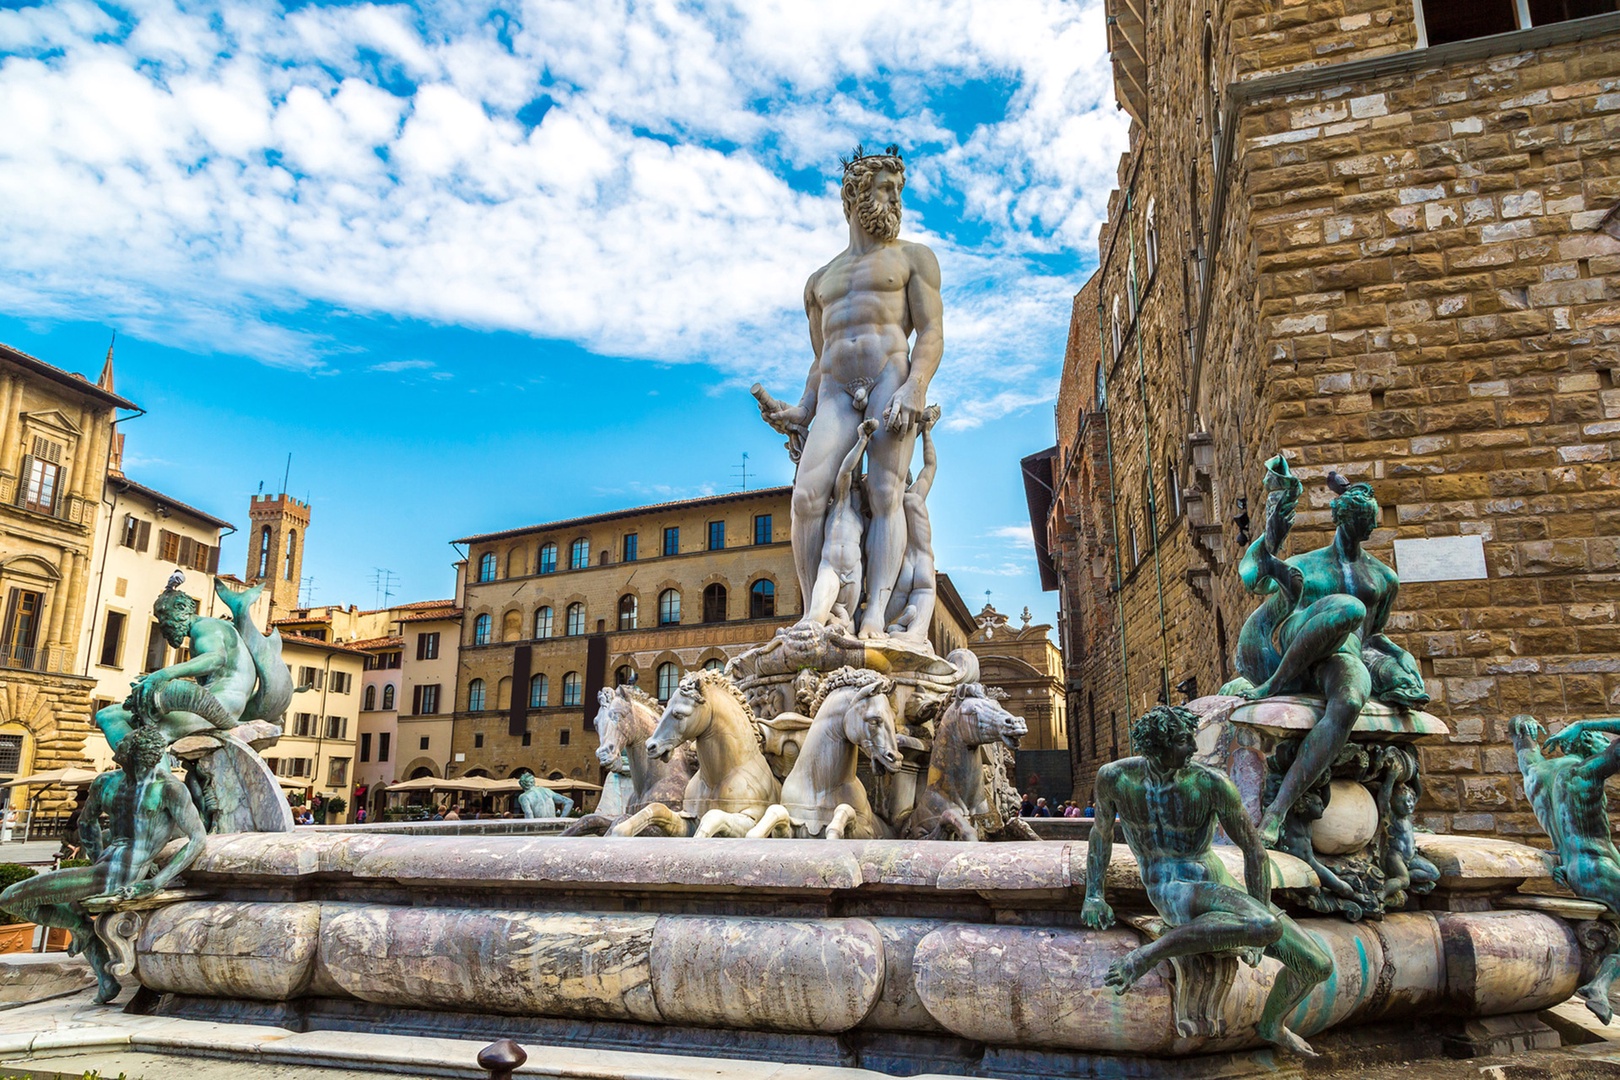 Sculptures delight all around in this piazza. This fountain celebrates first running water in 1565.